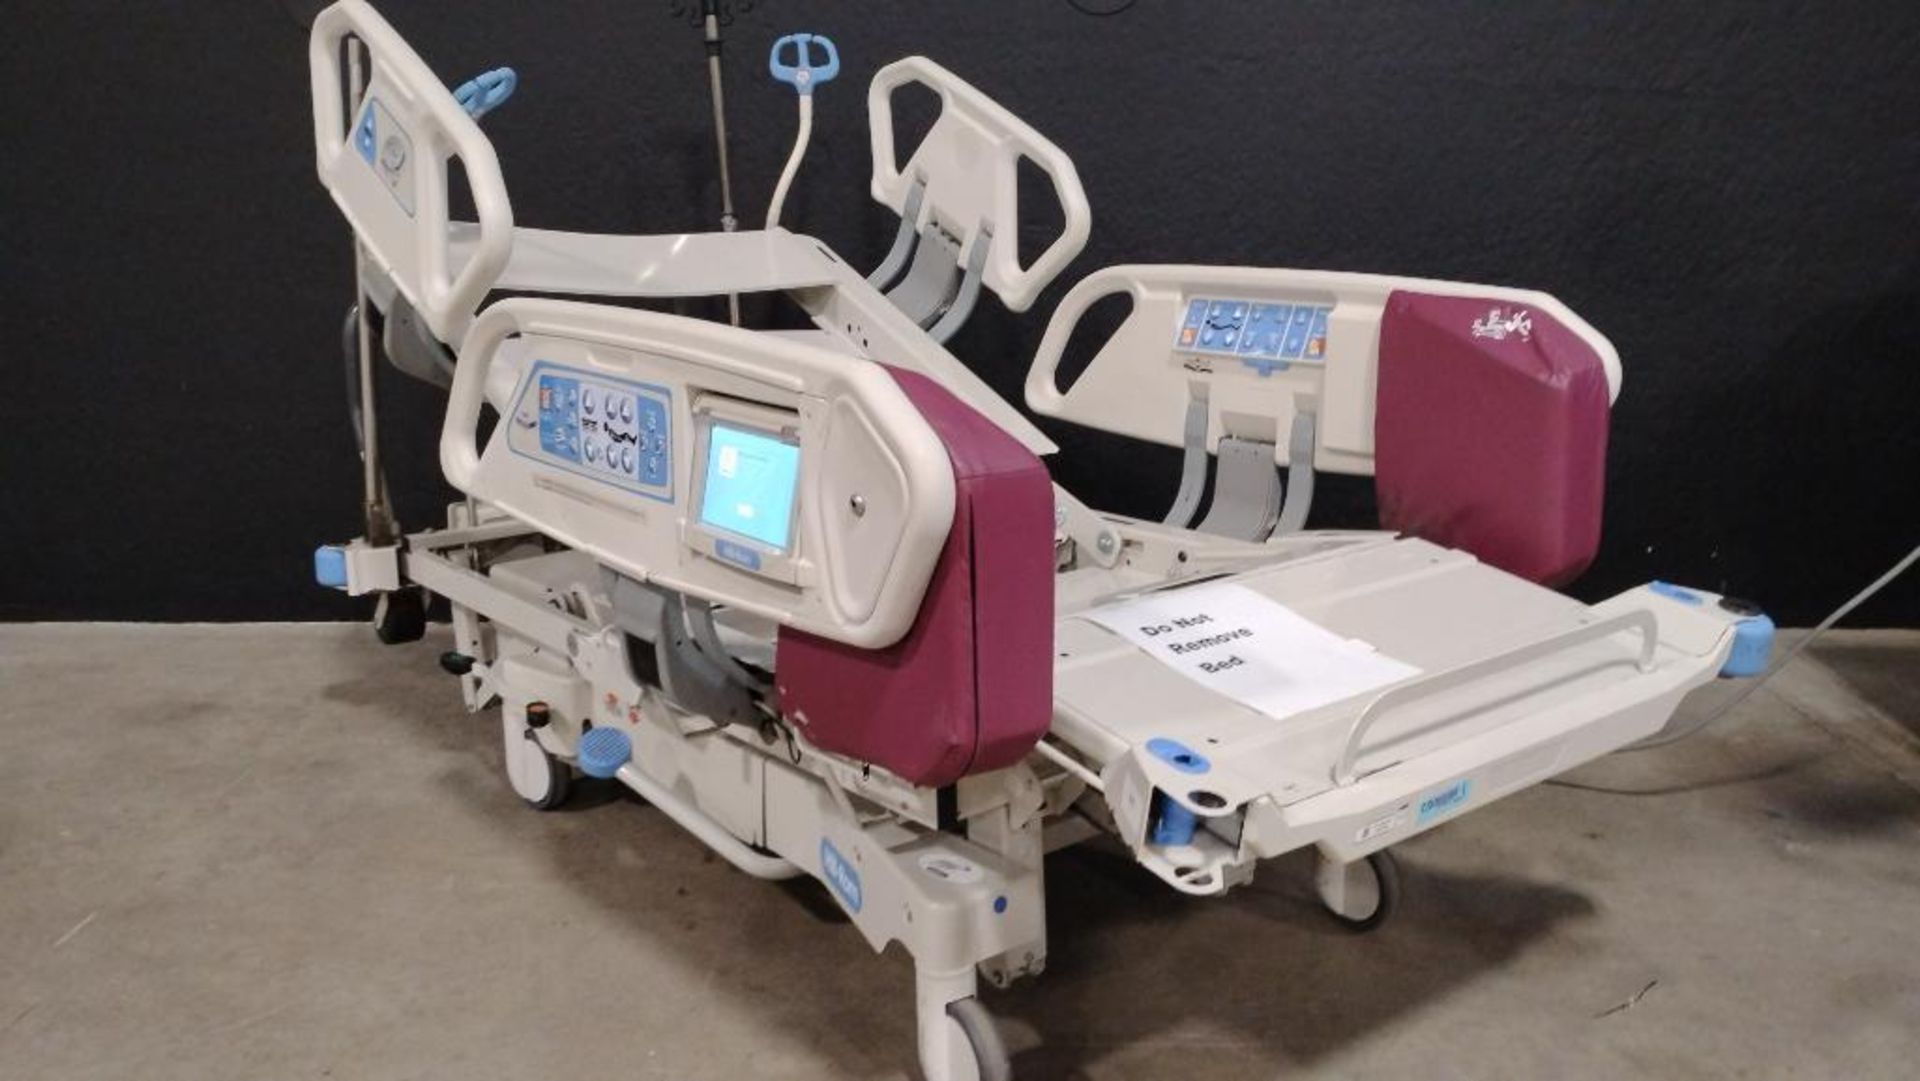 HILL-ROM TOTAL CARE SPORT 2 P1900 HOSPITAL BED - Image 2 of 3